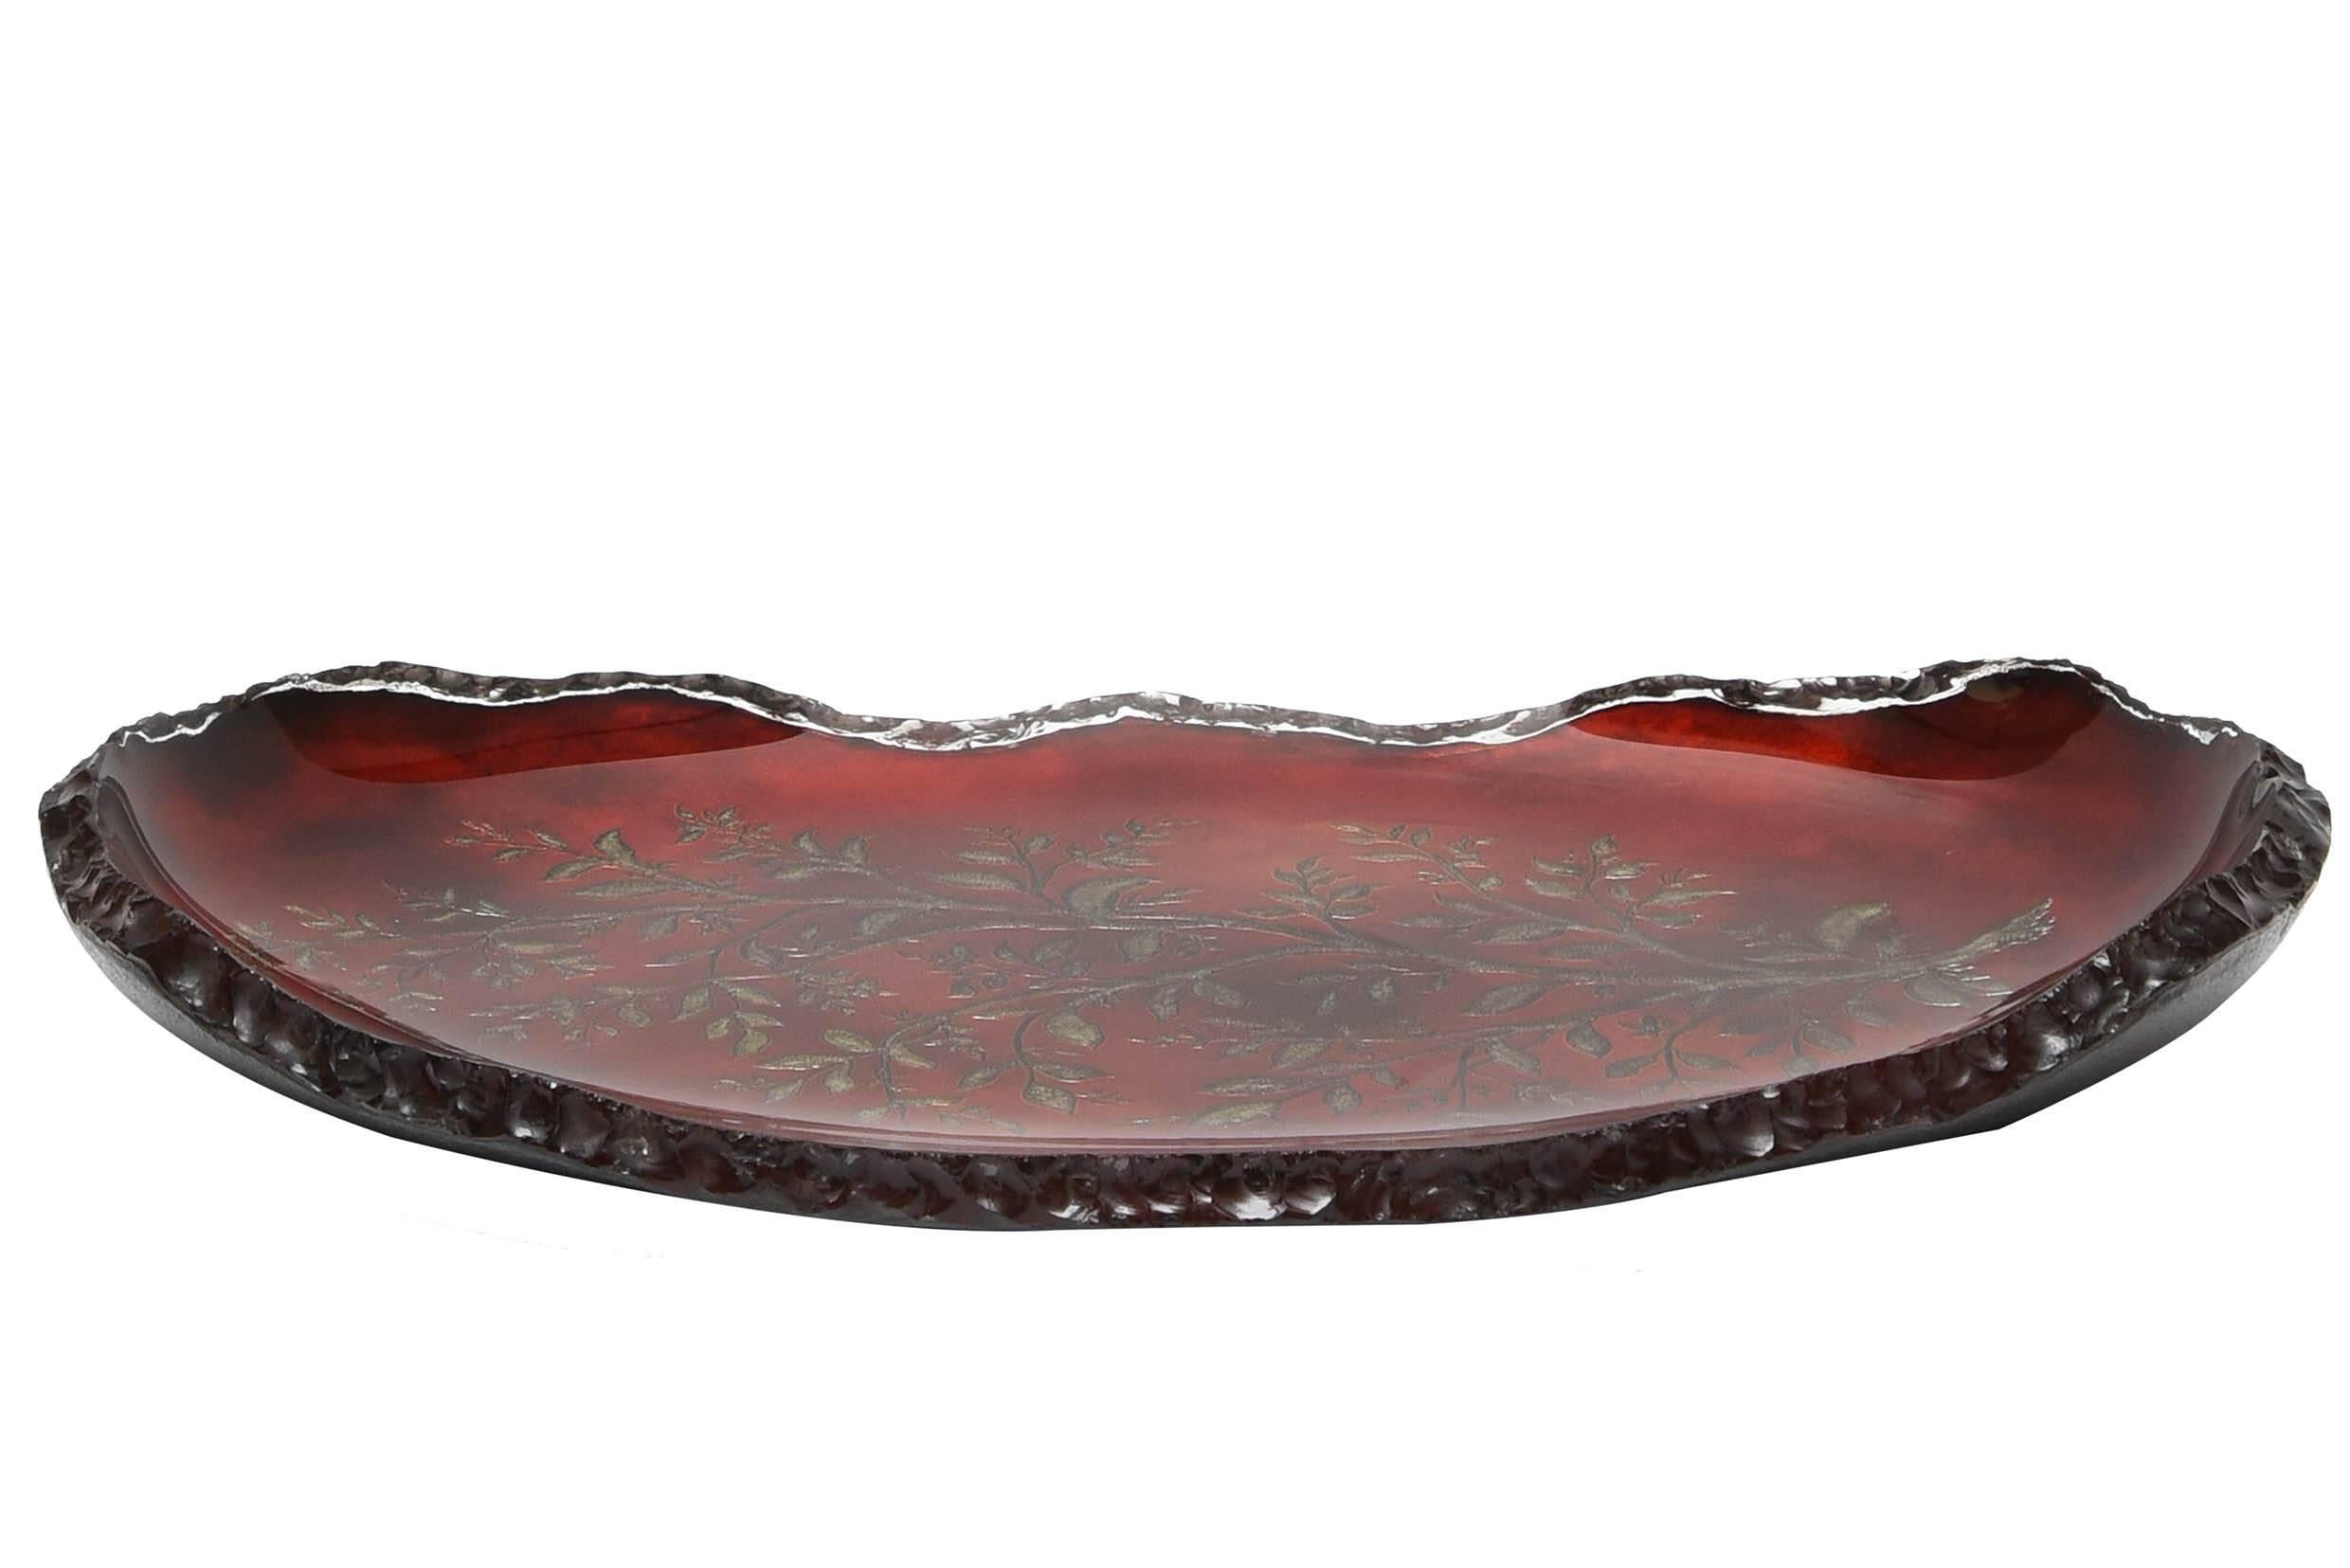 Curved red glass plate with golden leaf decoration on the back.
Manufactured by Erwin Walter Burger Cristalli d'Arte, 1950s.
Original paper label.
Measures: cm 51 x 32.